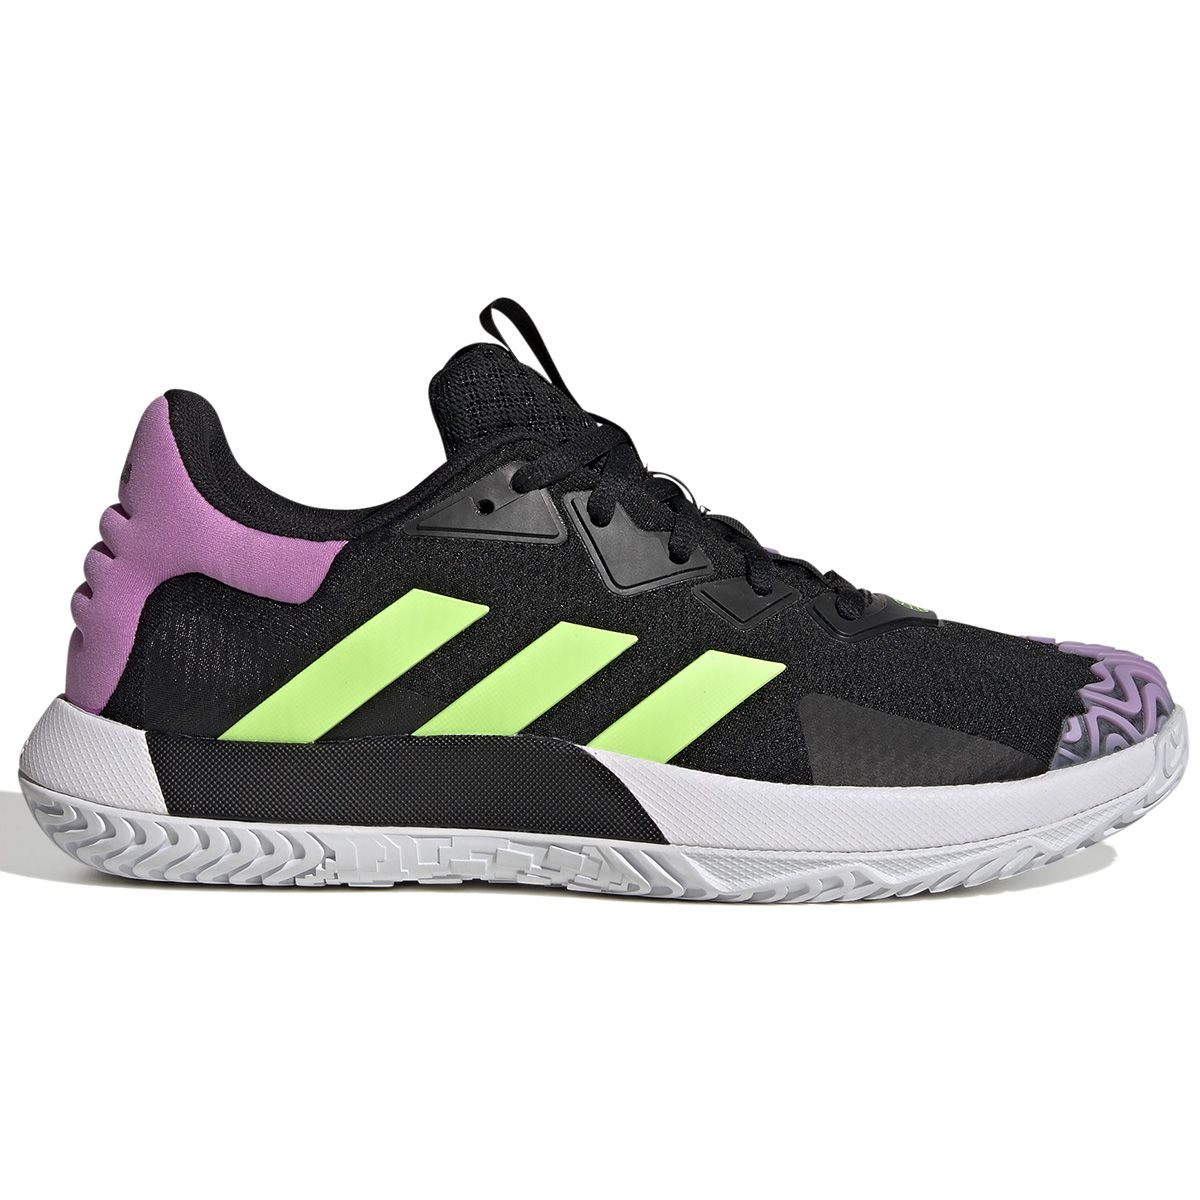 adidas Solematch Control Men's Tennis Shoes GY4690